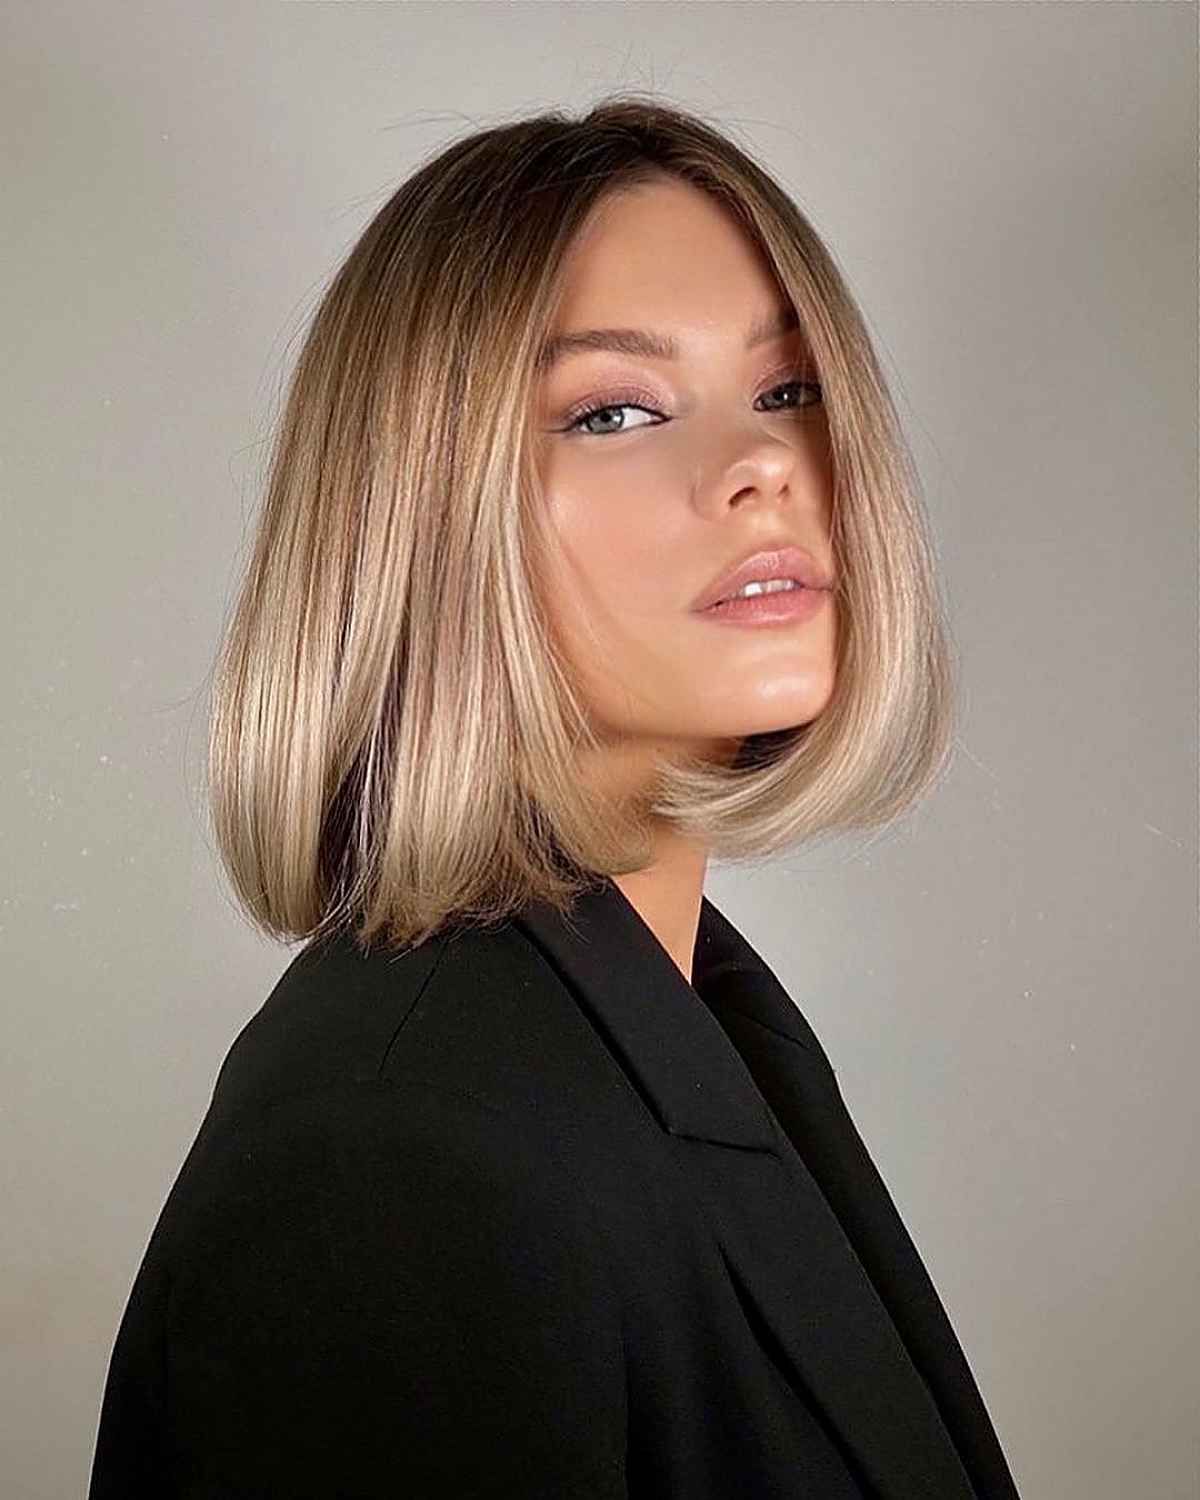 Cool Summer Bob Haircuts 2023: Choppy, Shaggy & Textured Styles to Try